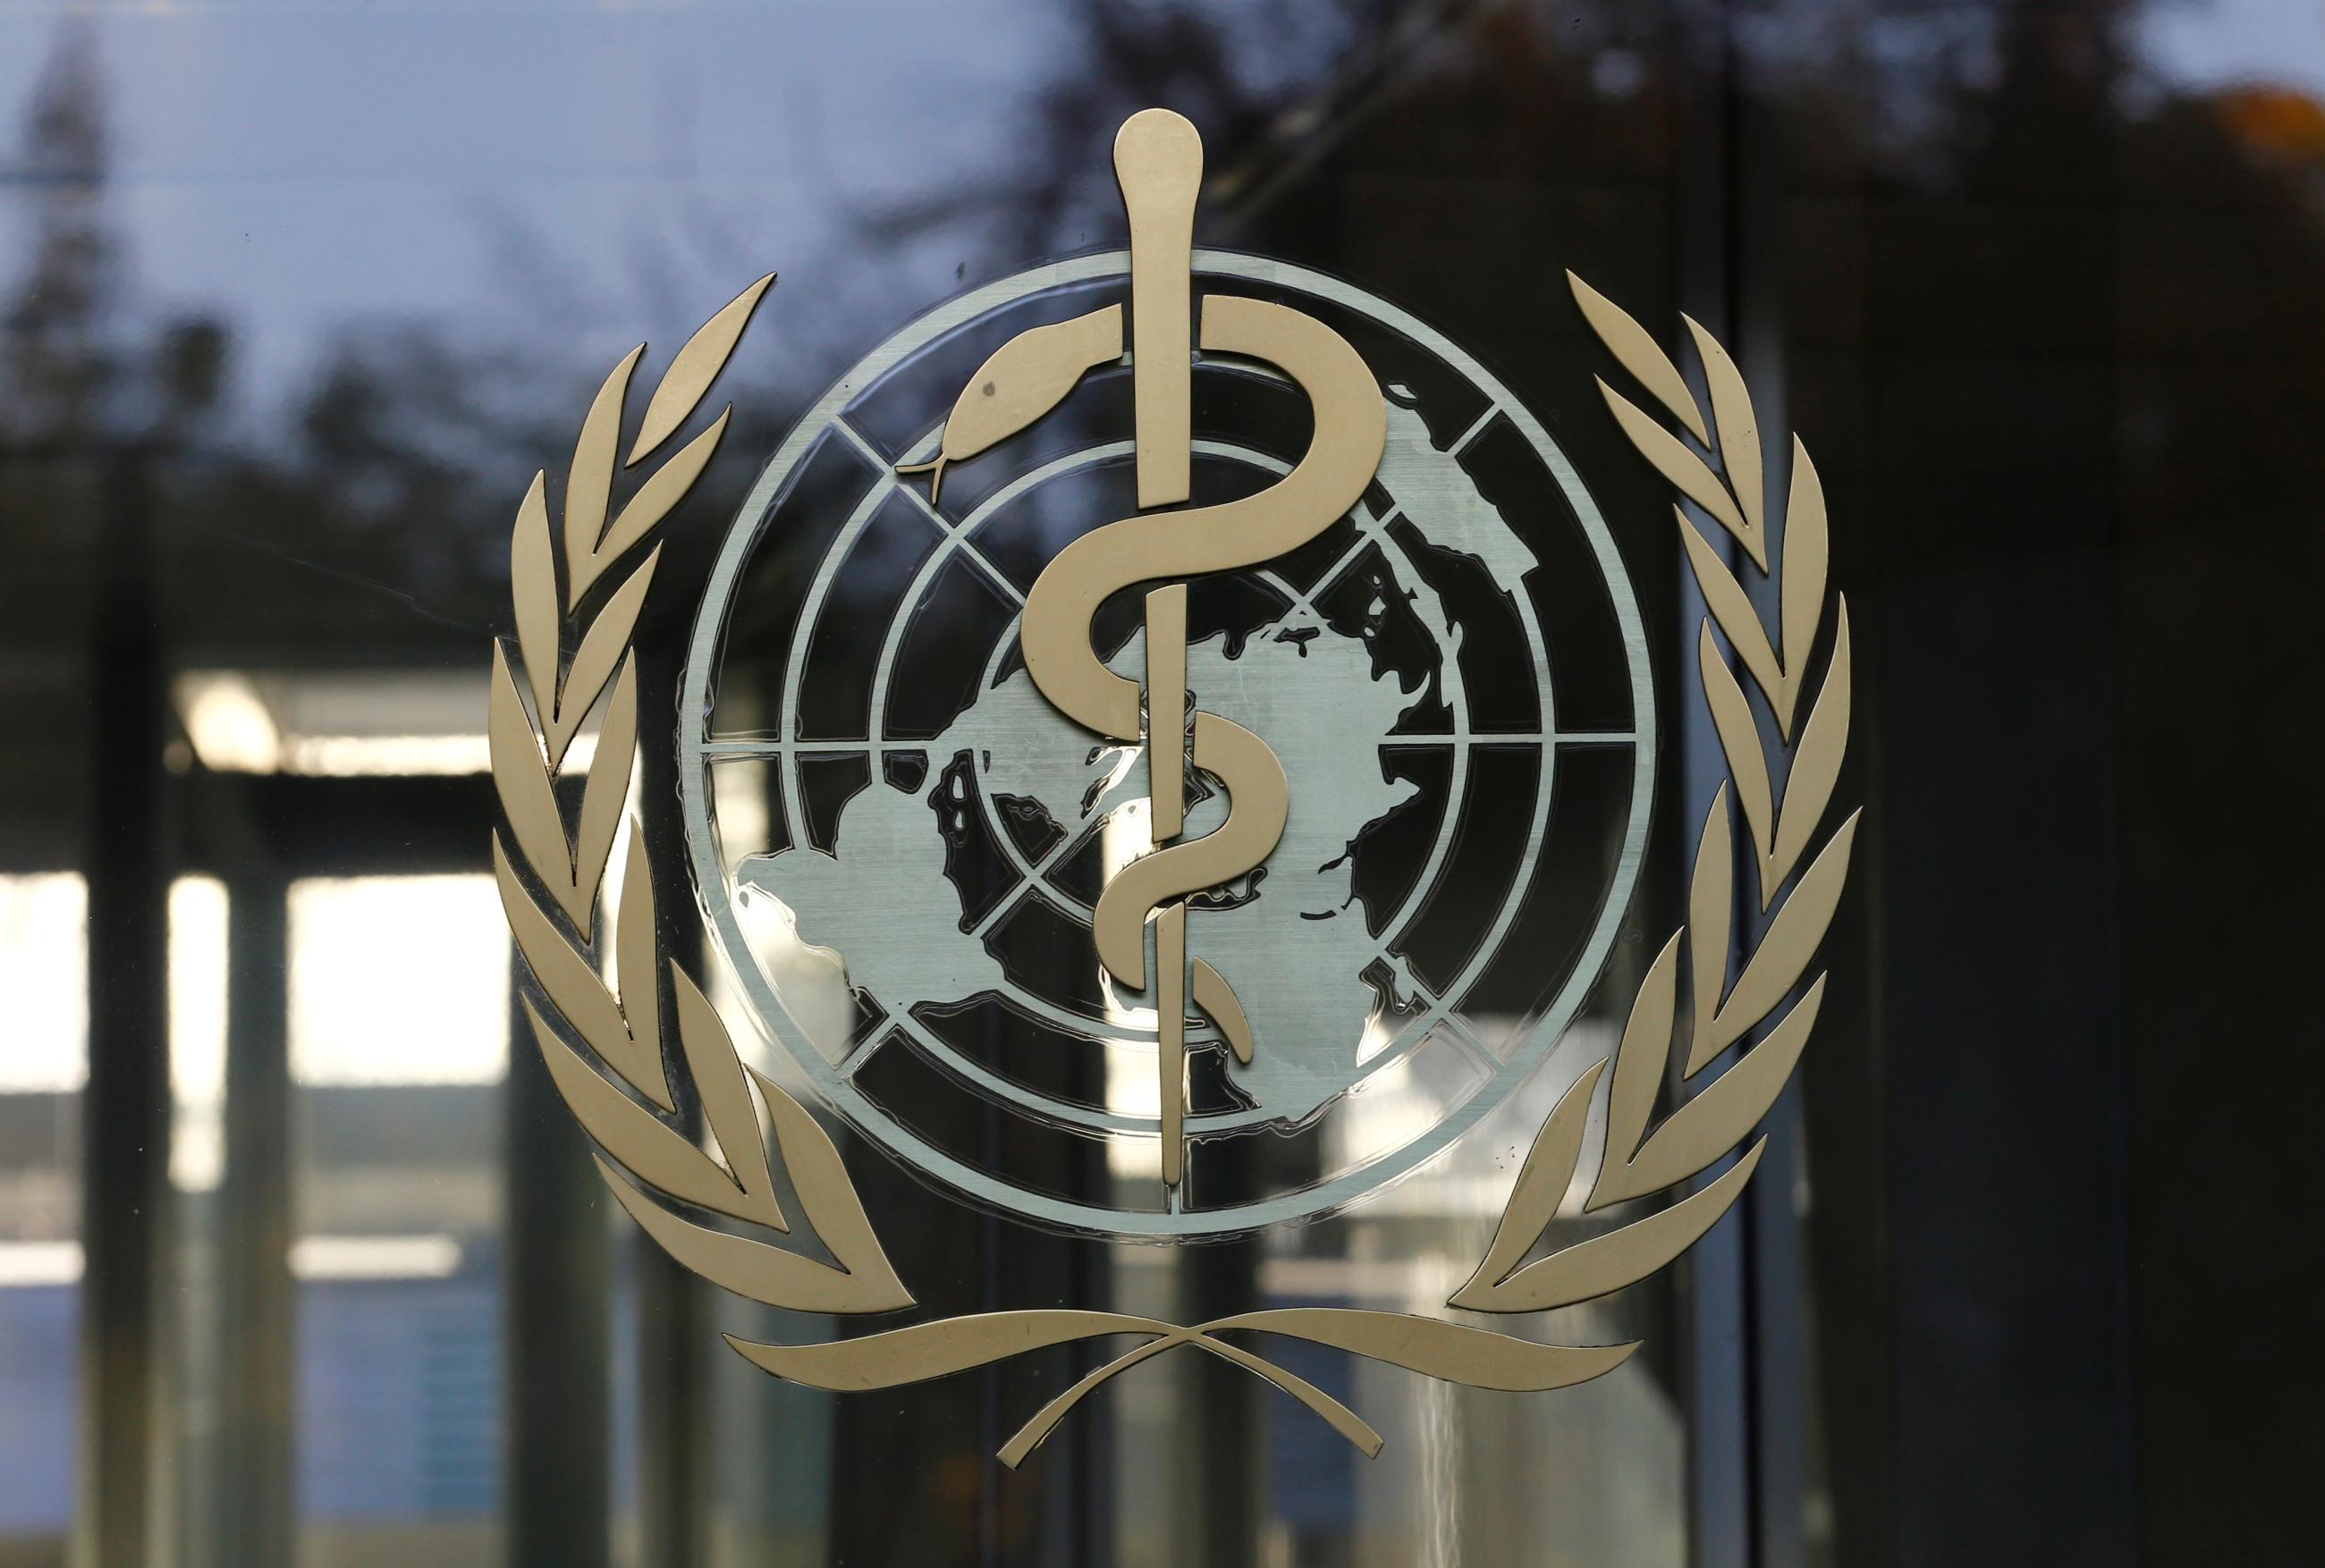 The logo of World Health Organization is shown at the headquarters.